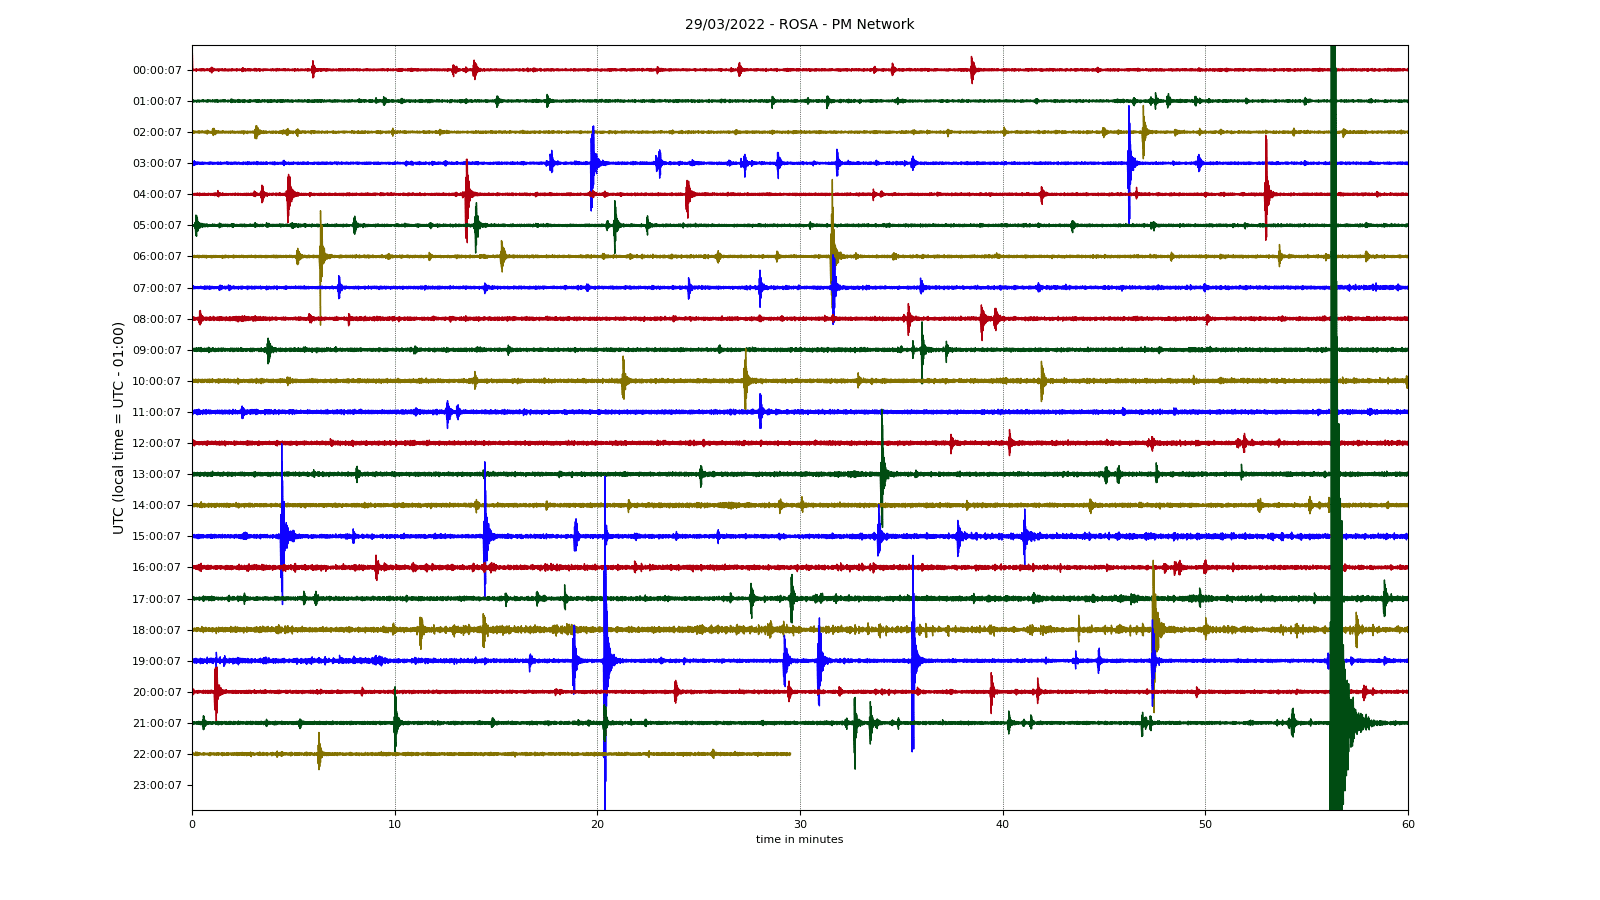 Seismic trace of ROSA station on São Jorge island, showing the magnitude 4 quake in the evening